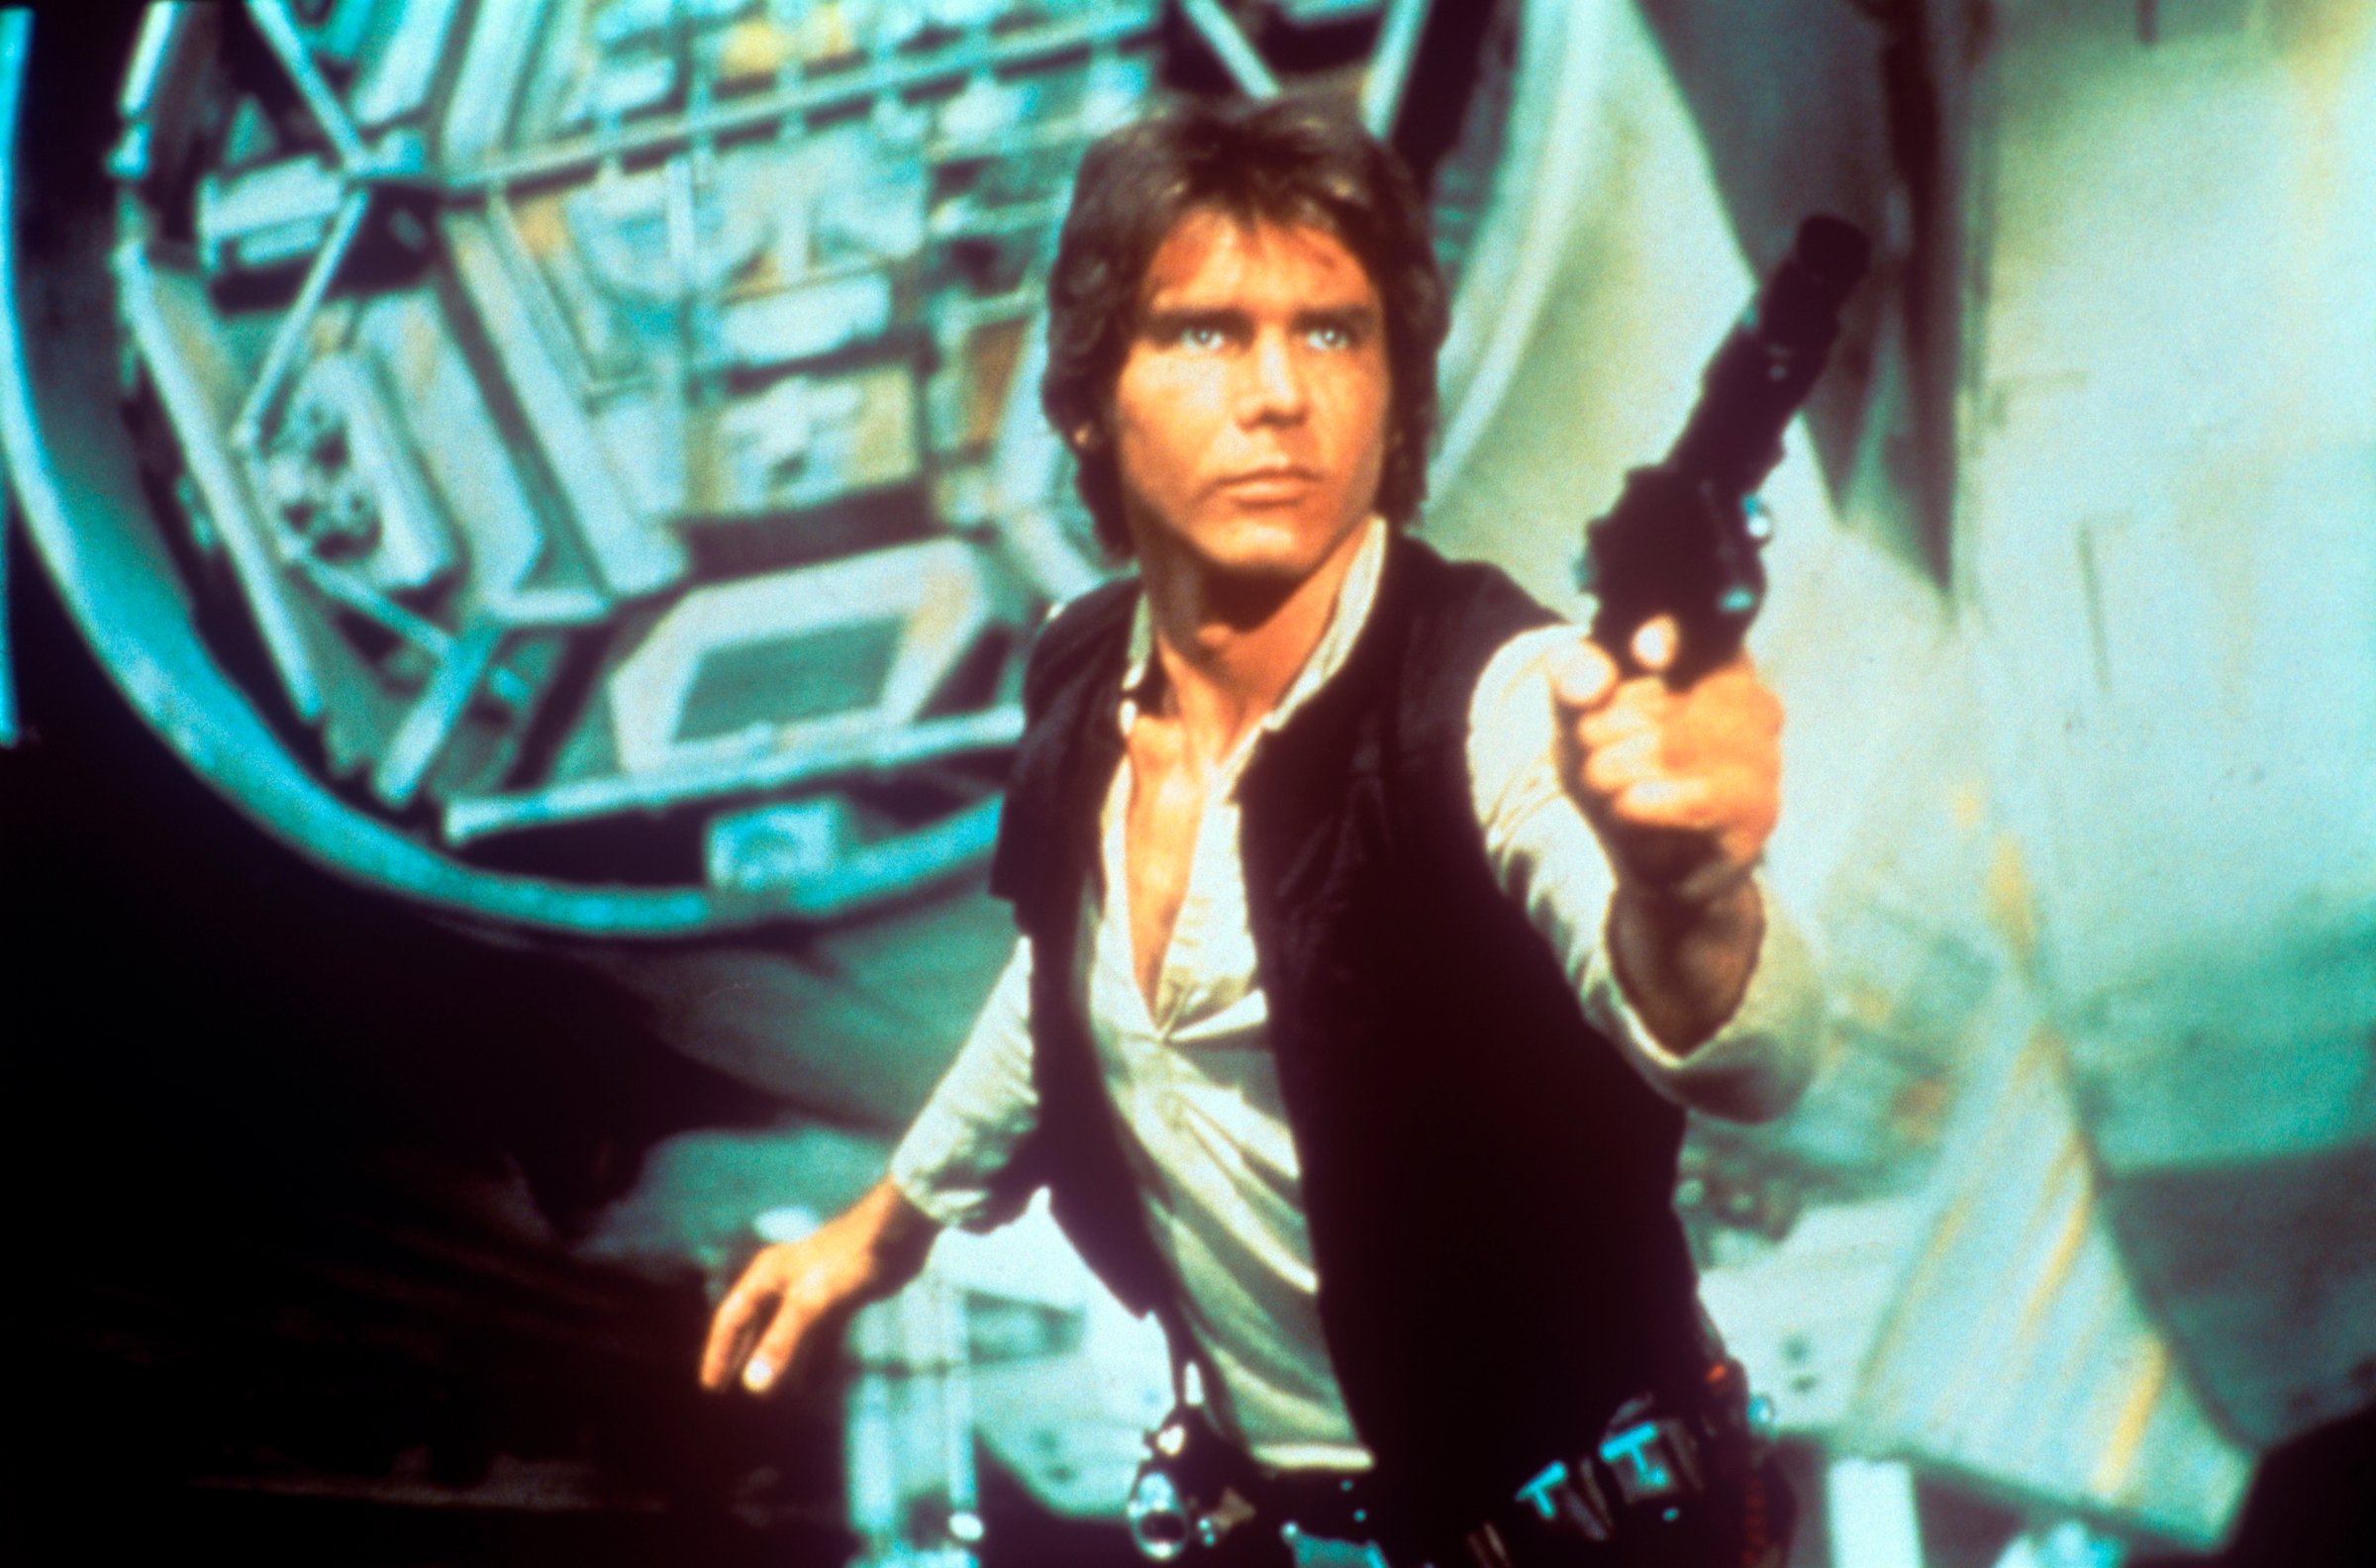 In a scene from George Lucas' epic space opera Star Wars, the American actor Harrison Ford as rebel smuggler Han Solo draws a gun against enemies; behind him can be seen a fantastic space shuttle. USA, 1977.